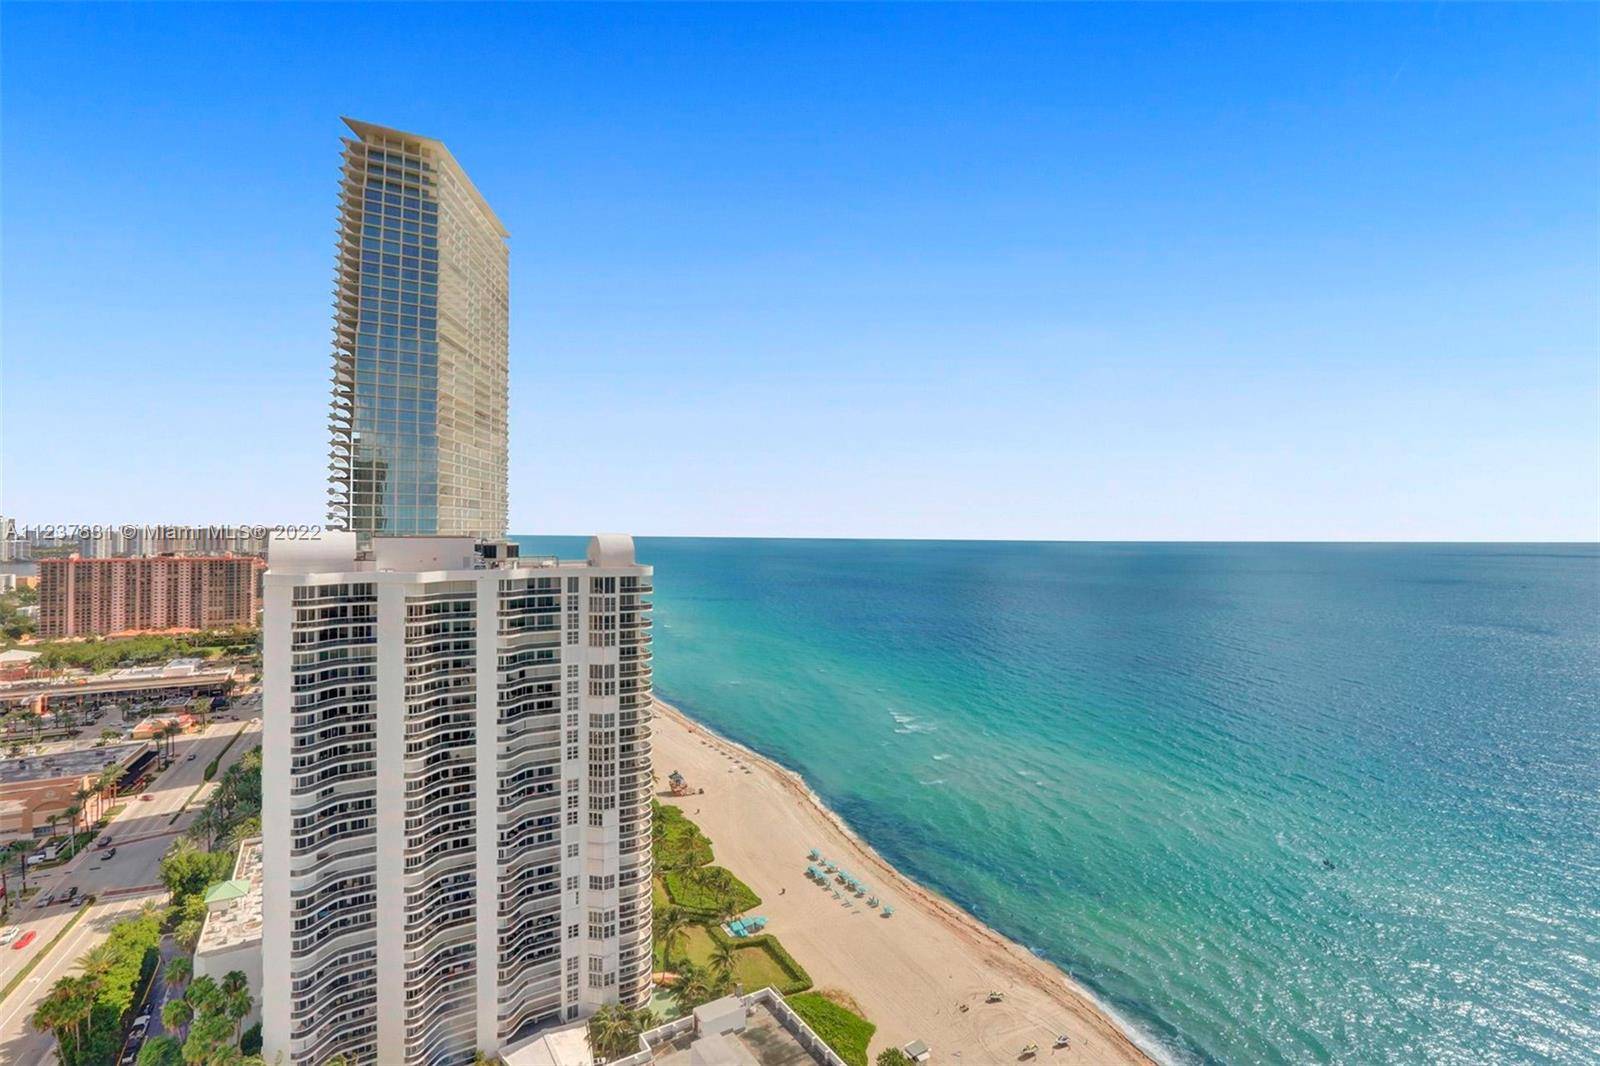 OCEAN FRONT BLDG, BREATHTAKING OCEAN VIEWS FROM THIS FULLY FURNISHED 1 BDRM 1.